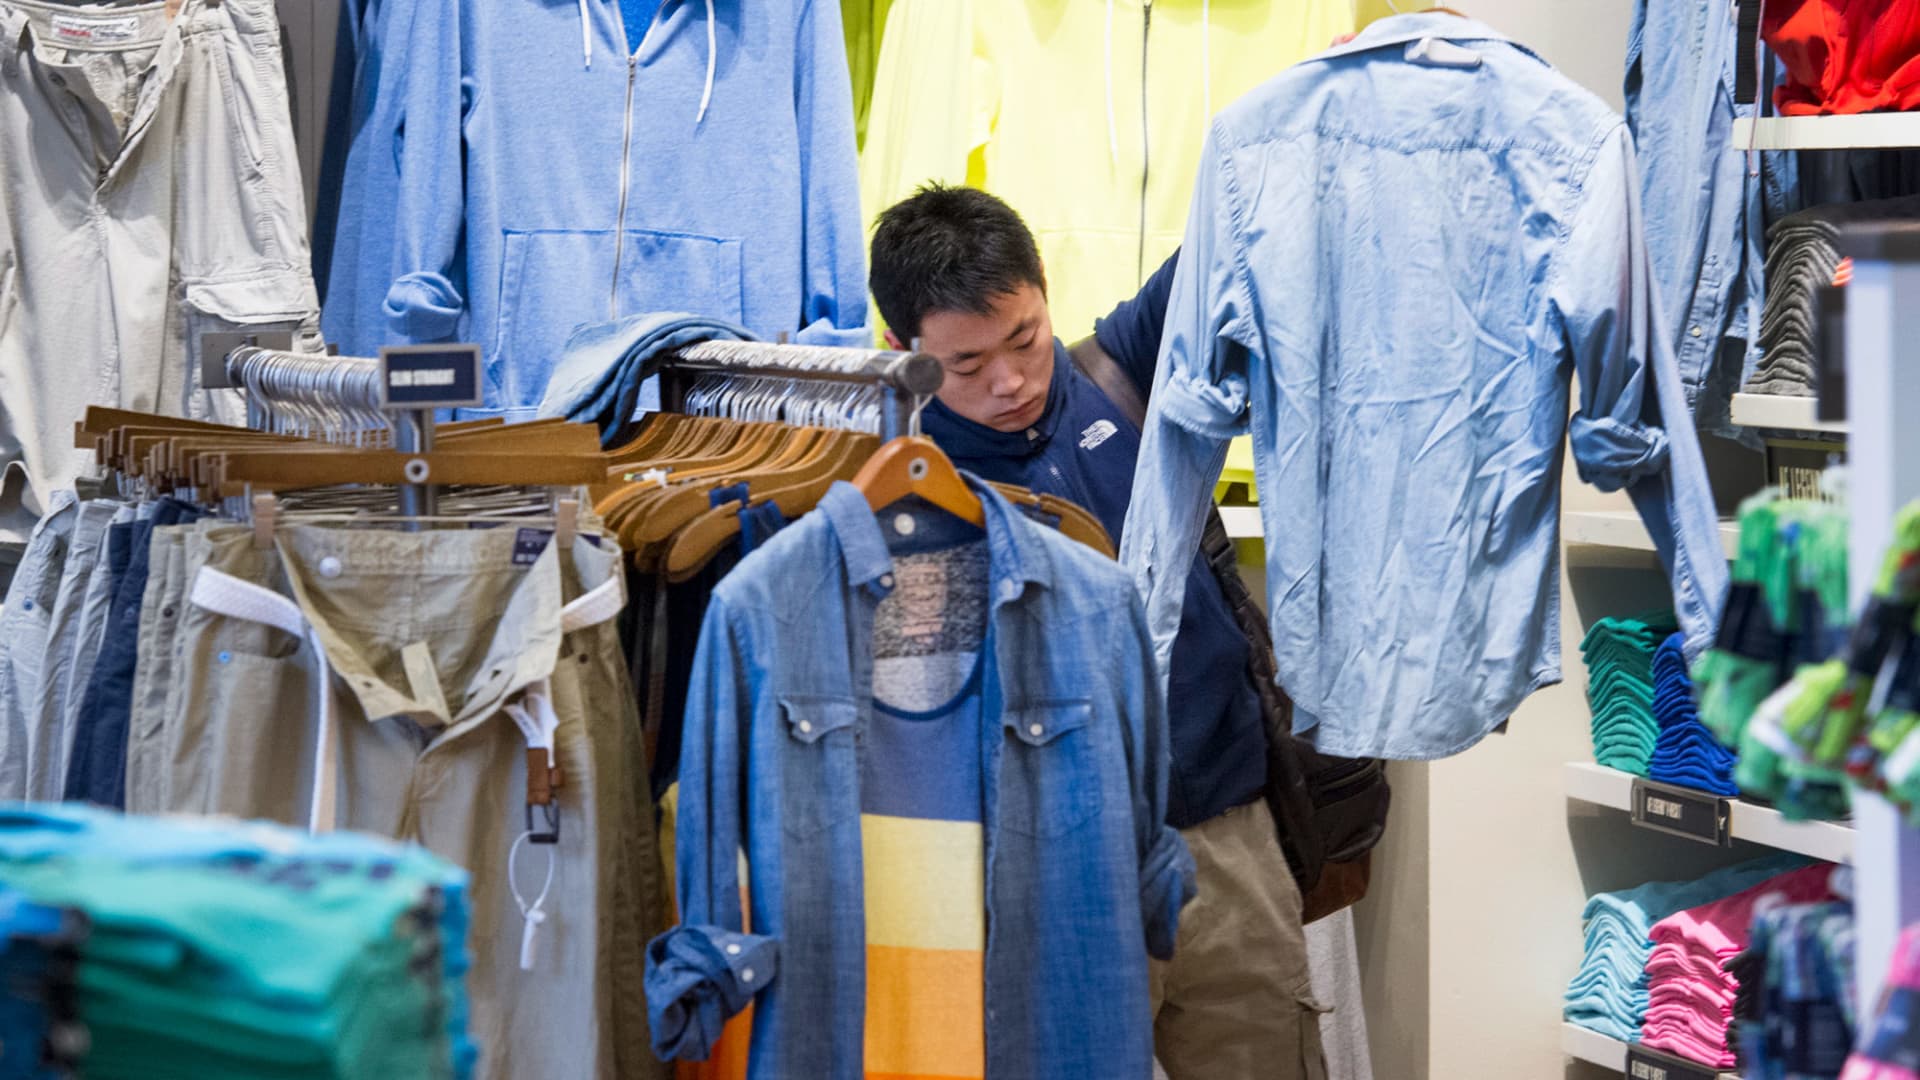 Apparel prices remain high even as retailers try to clear inventory